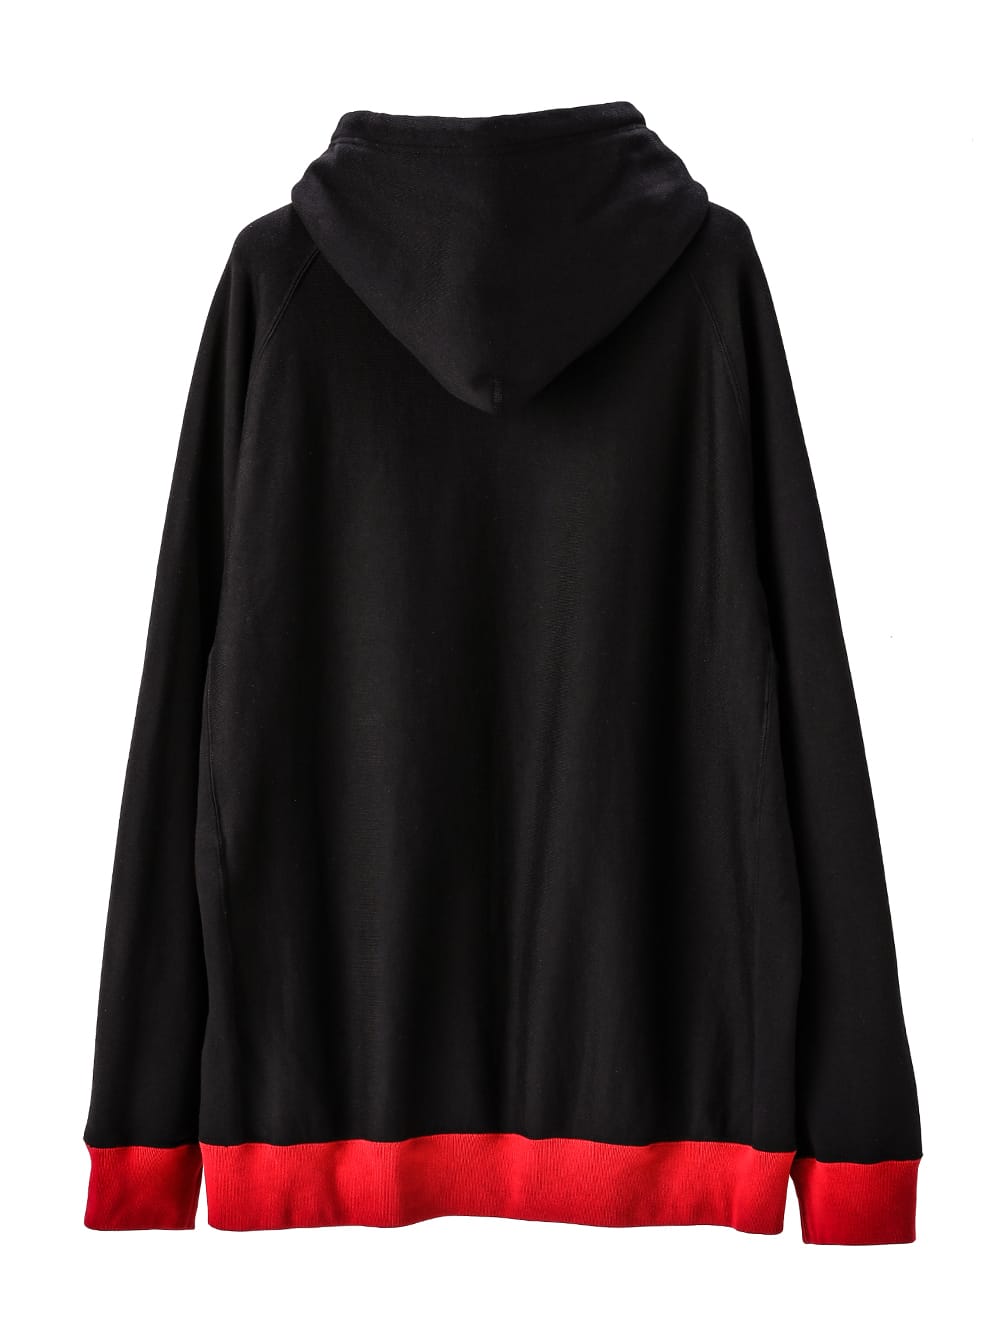 sxc.0002-black×red Listen To The Soloist.(oversized bicolor hoodie 